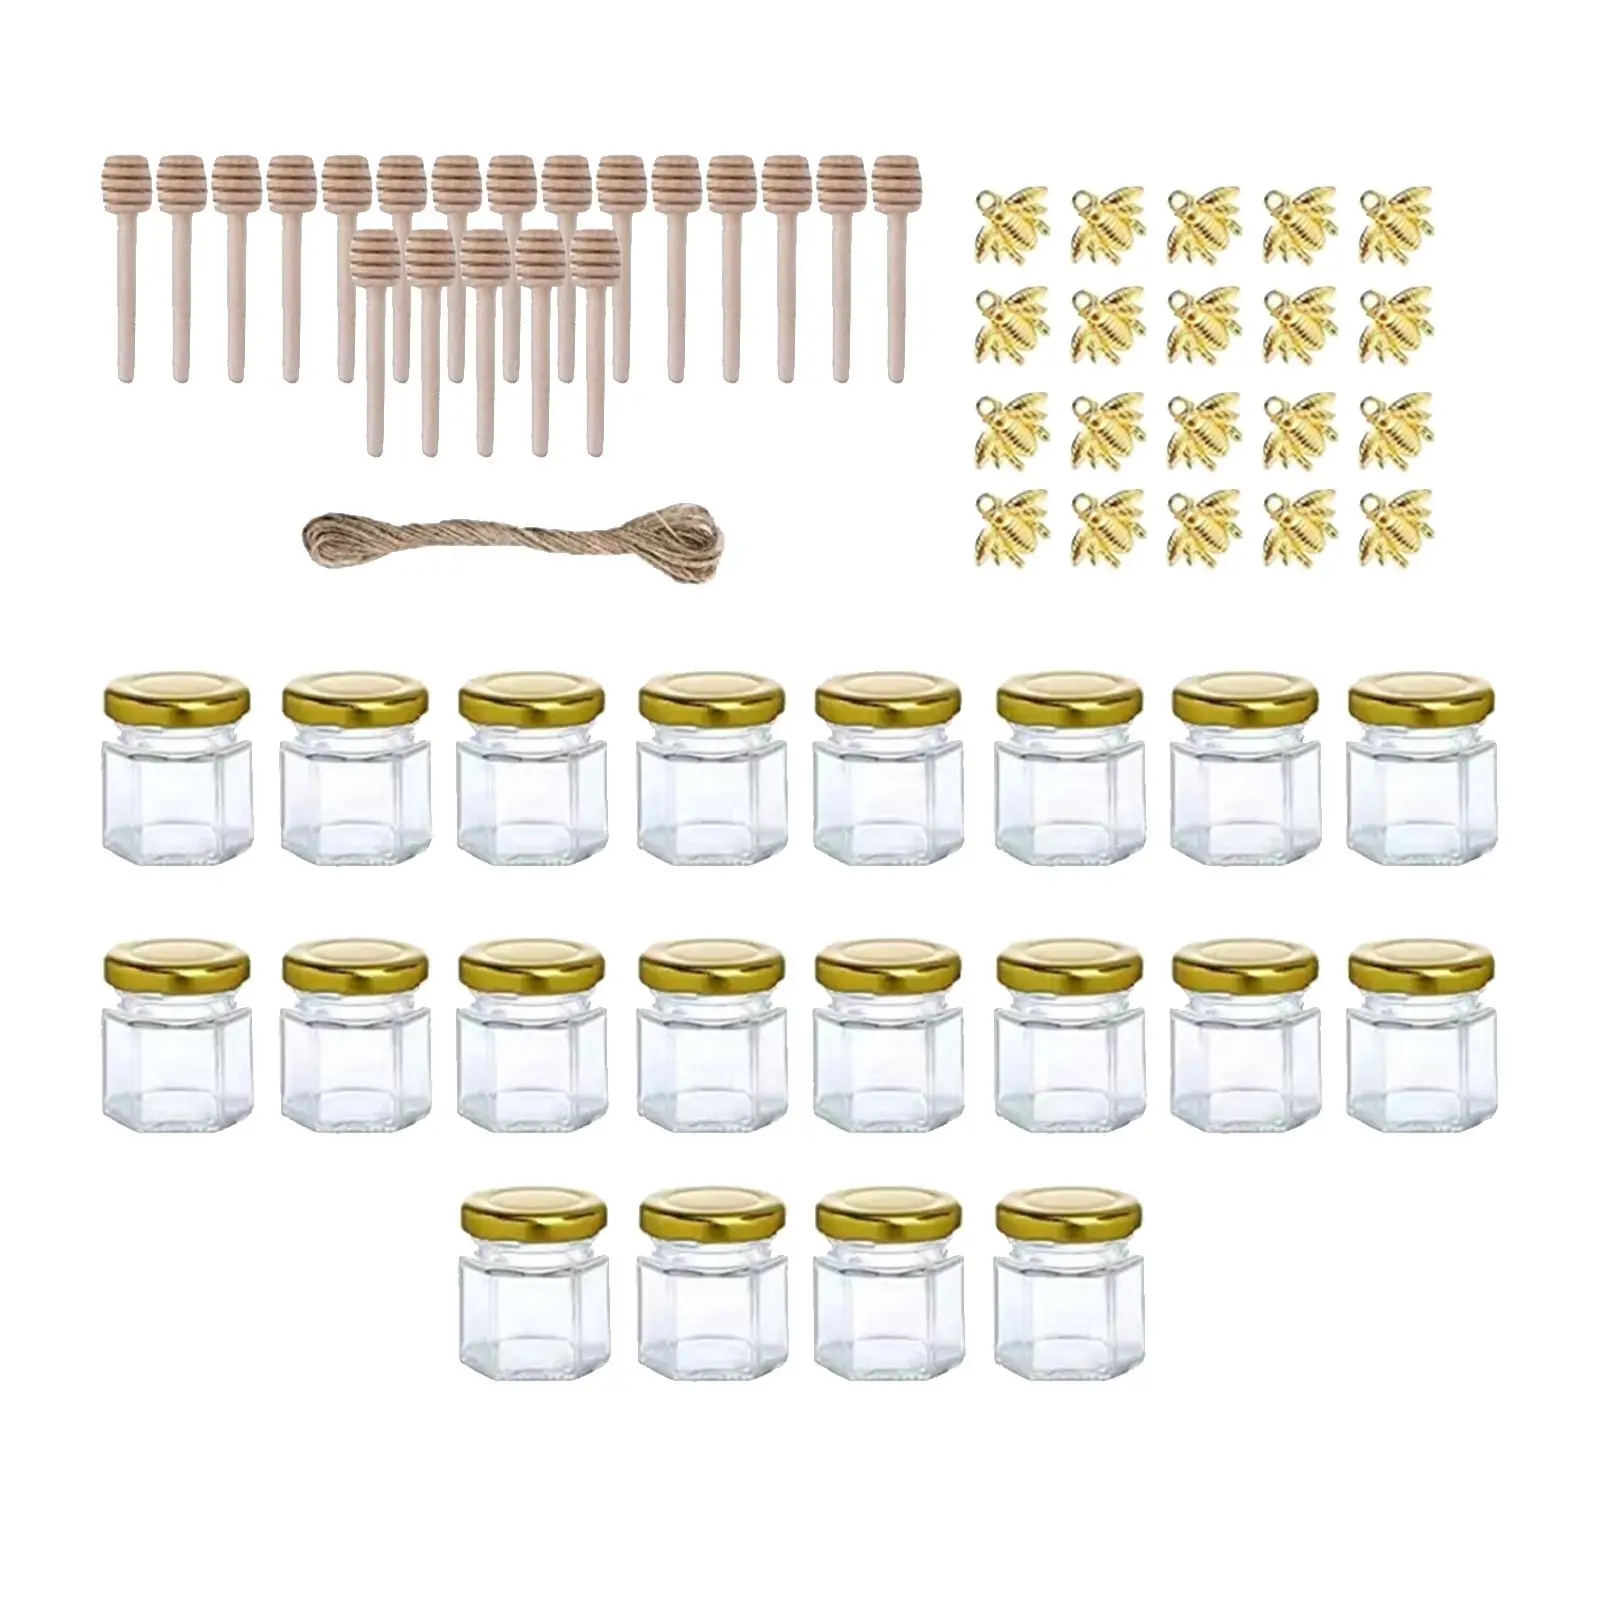 20 Pieces Small Glass Jars 45ml/1.5oz for Canning, Storing, and Decorative Purpose Candle Making Liquids Honey Wedding